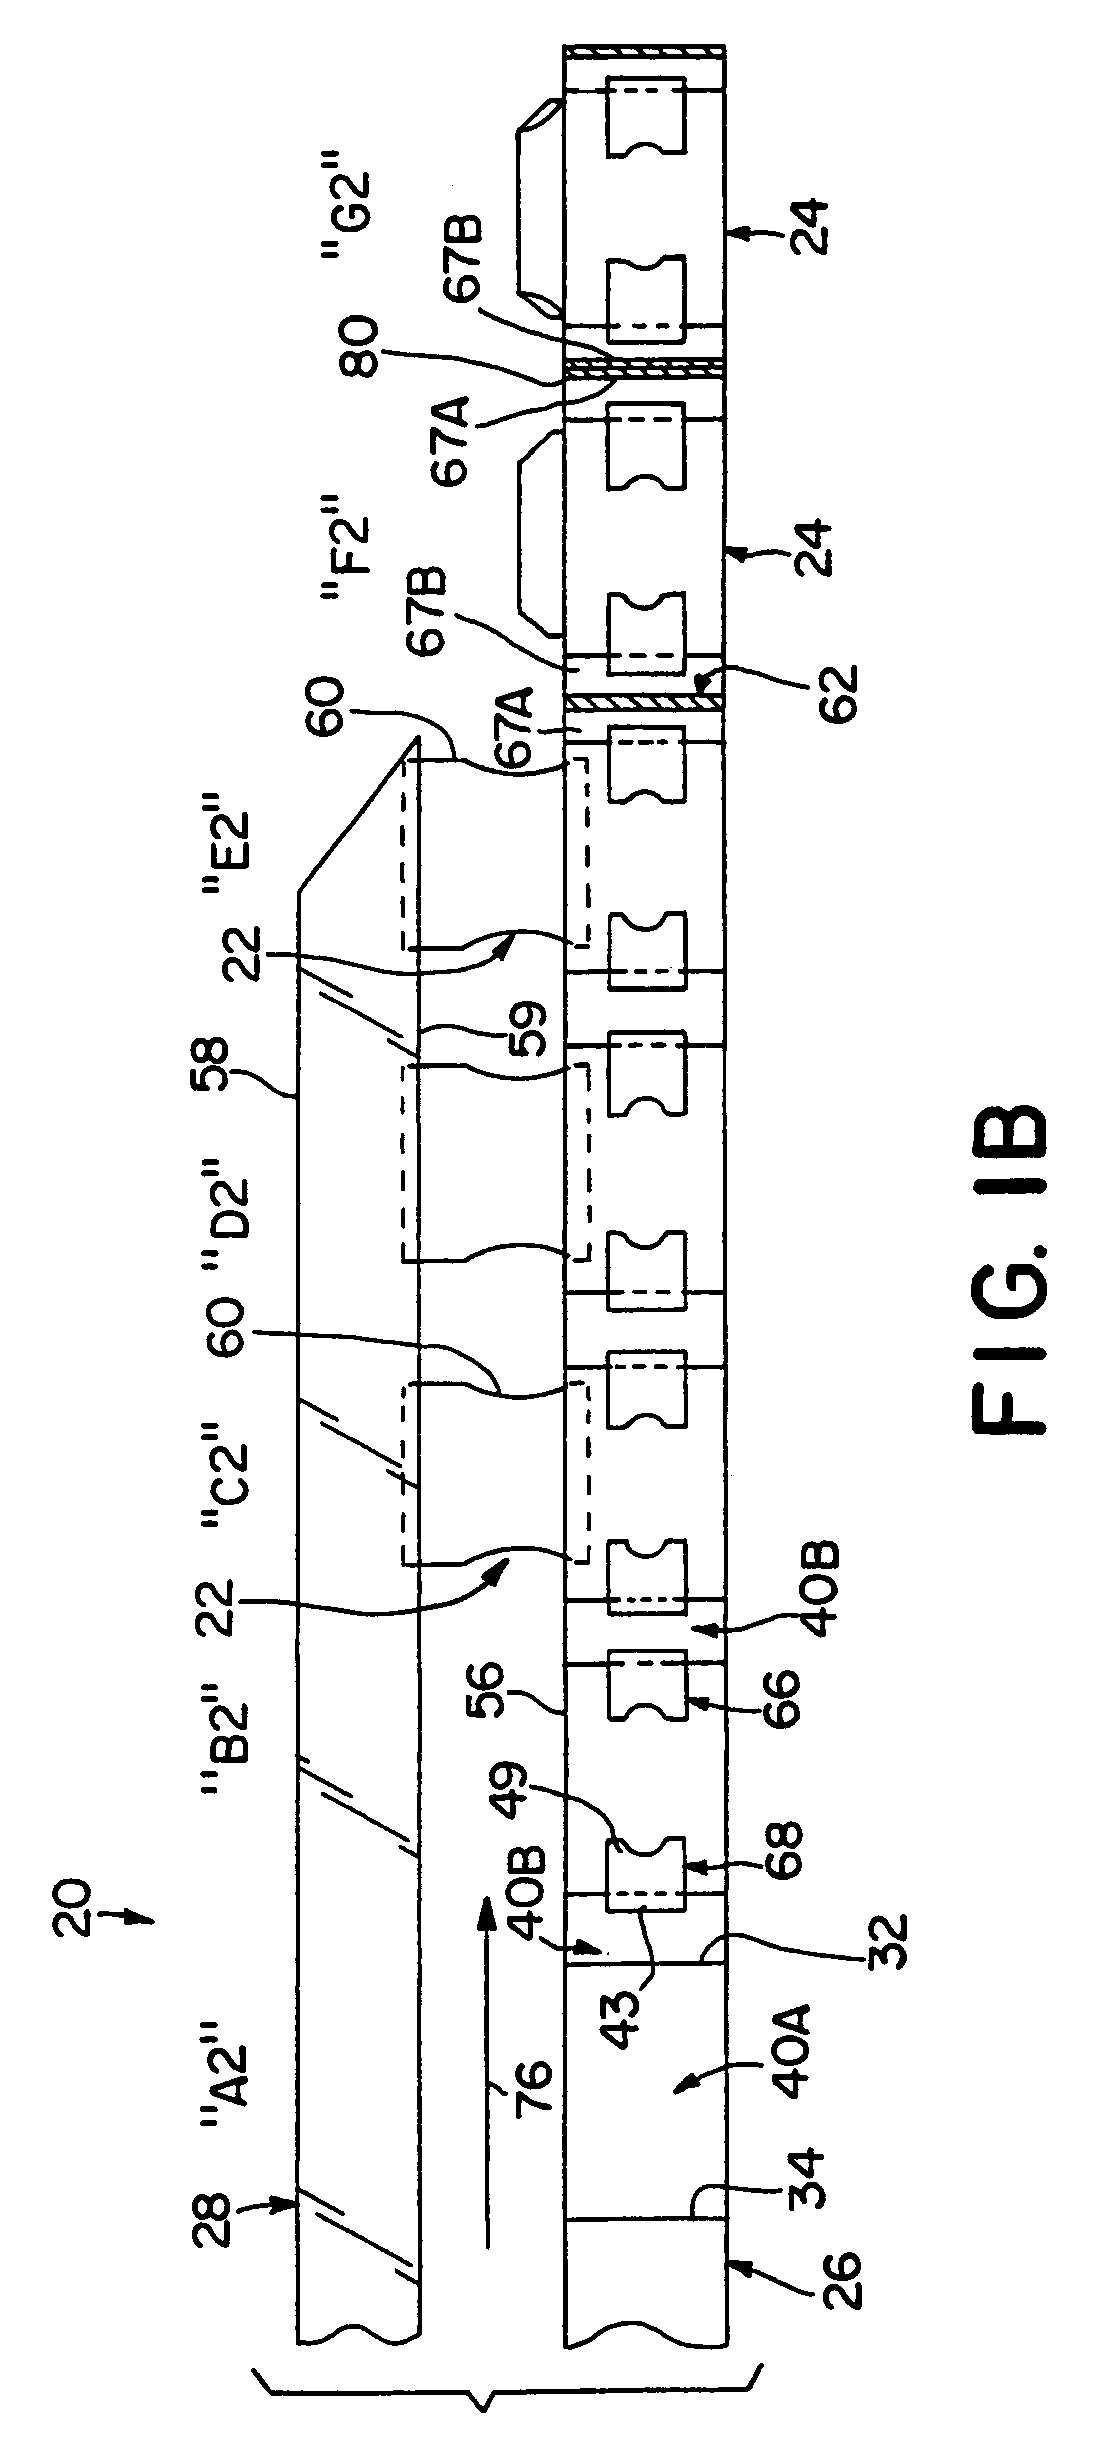 Method of assembling personal care absorbent article